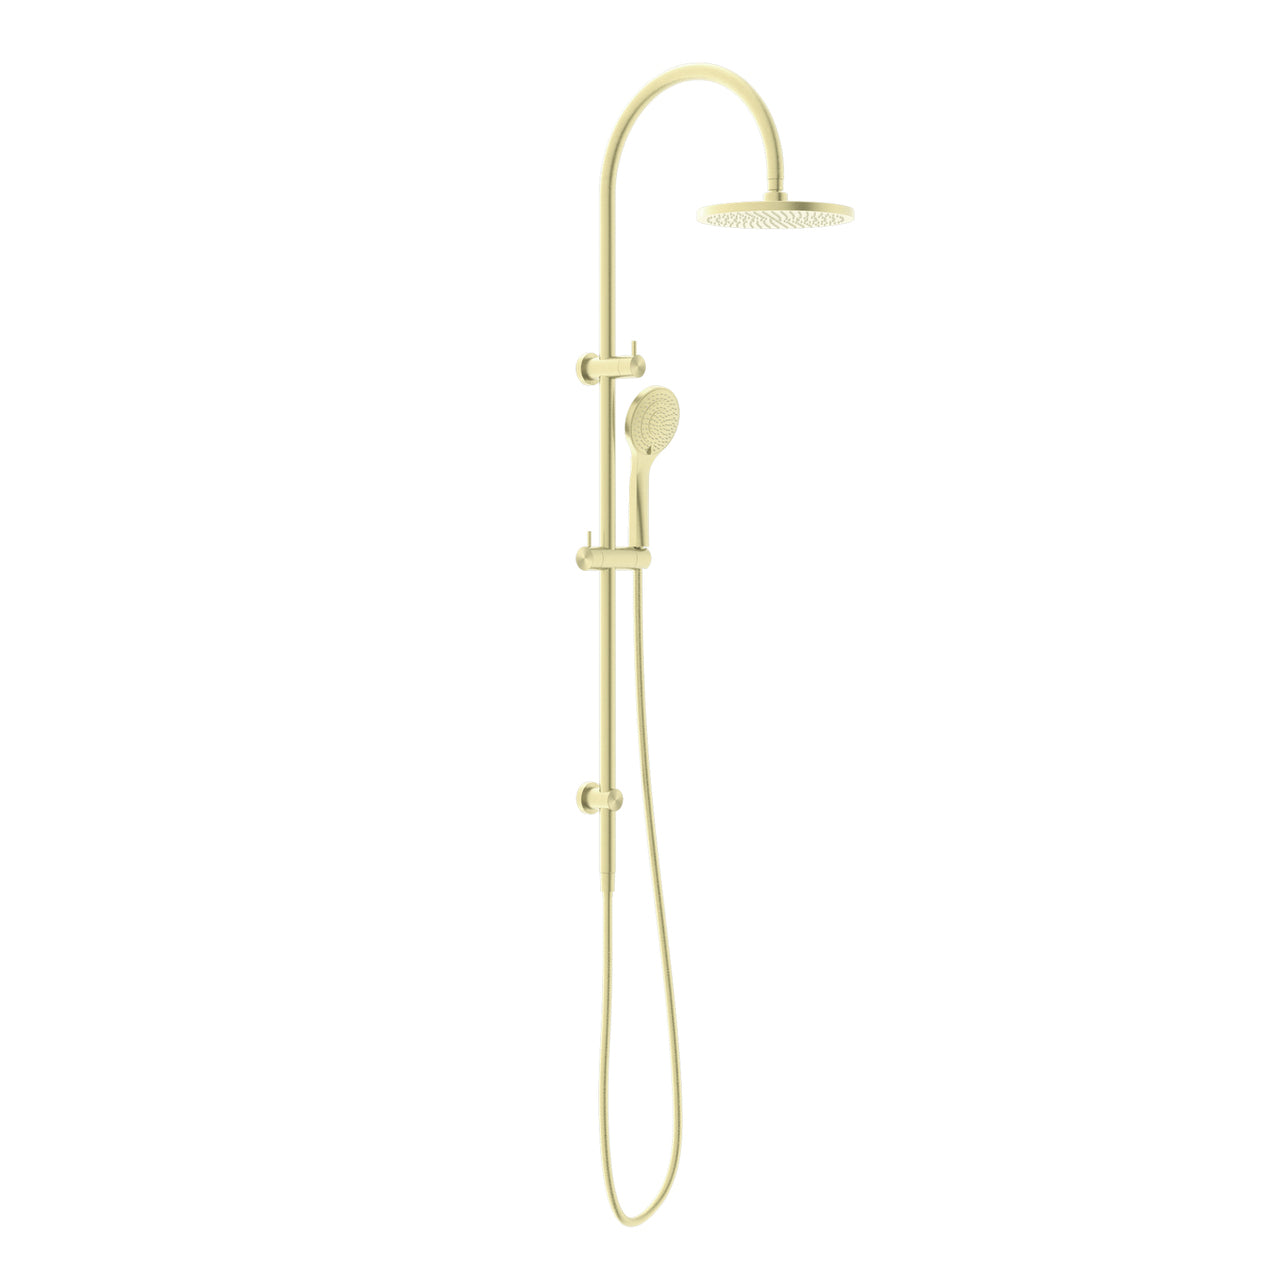 Nero Mecca Twin Shower With Air Shower, Brushed Gold